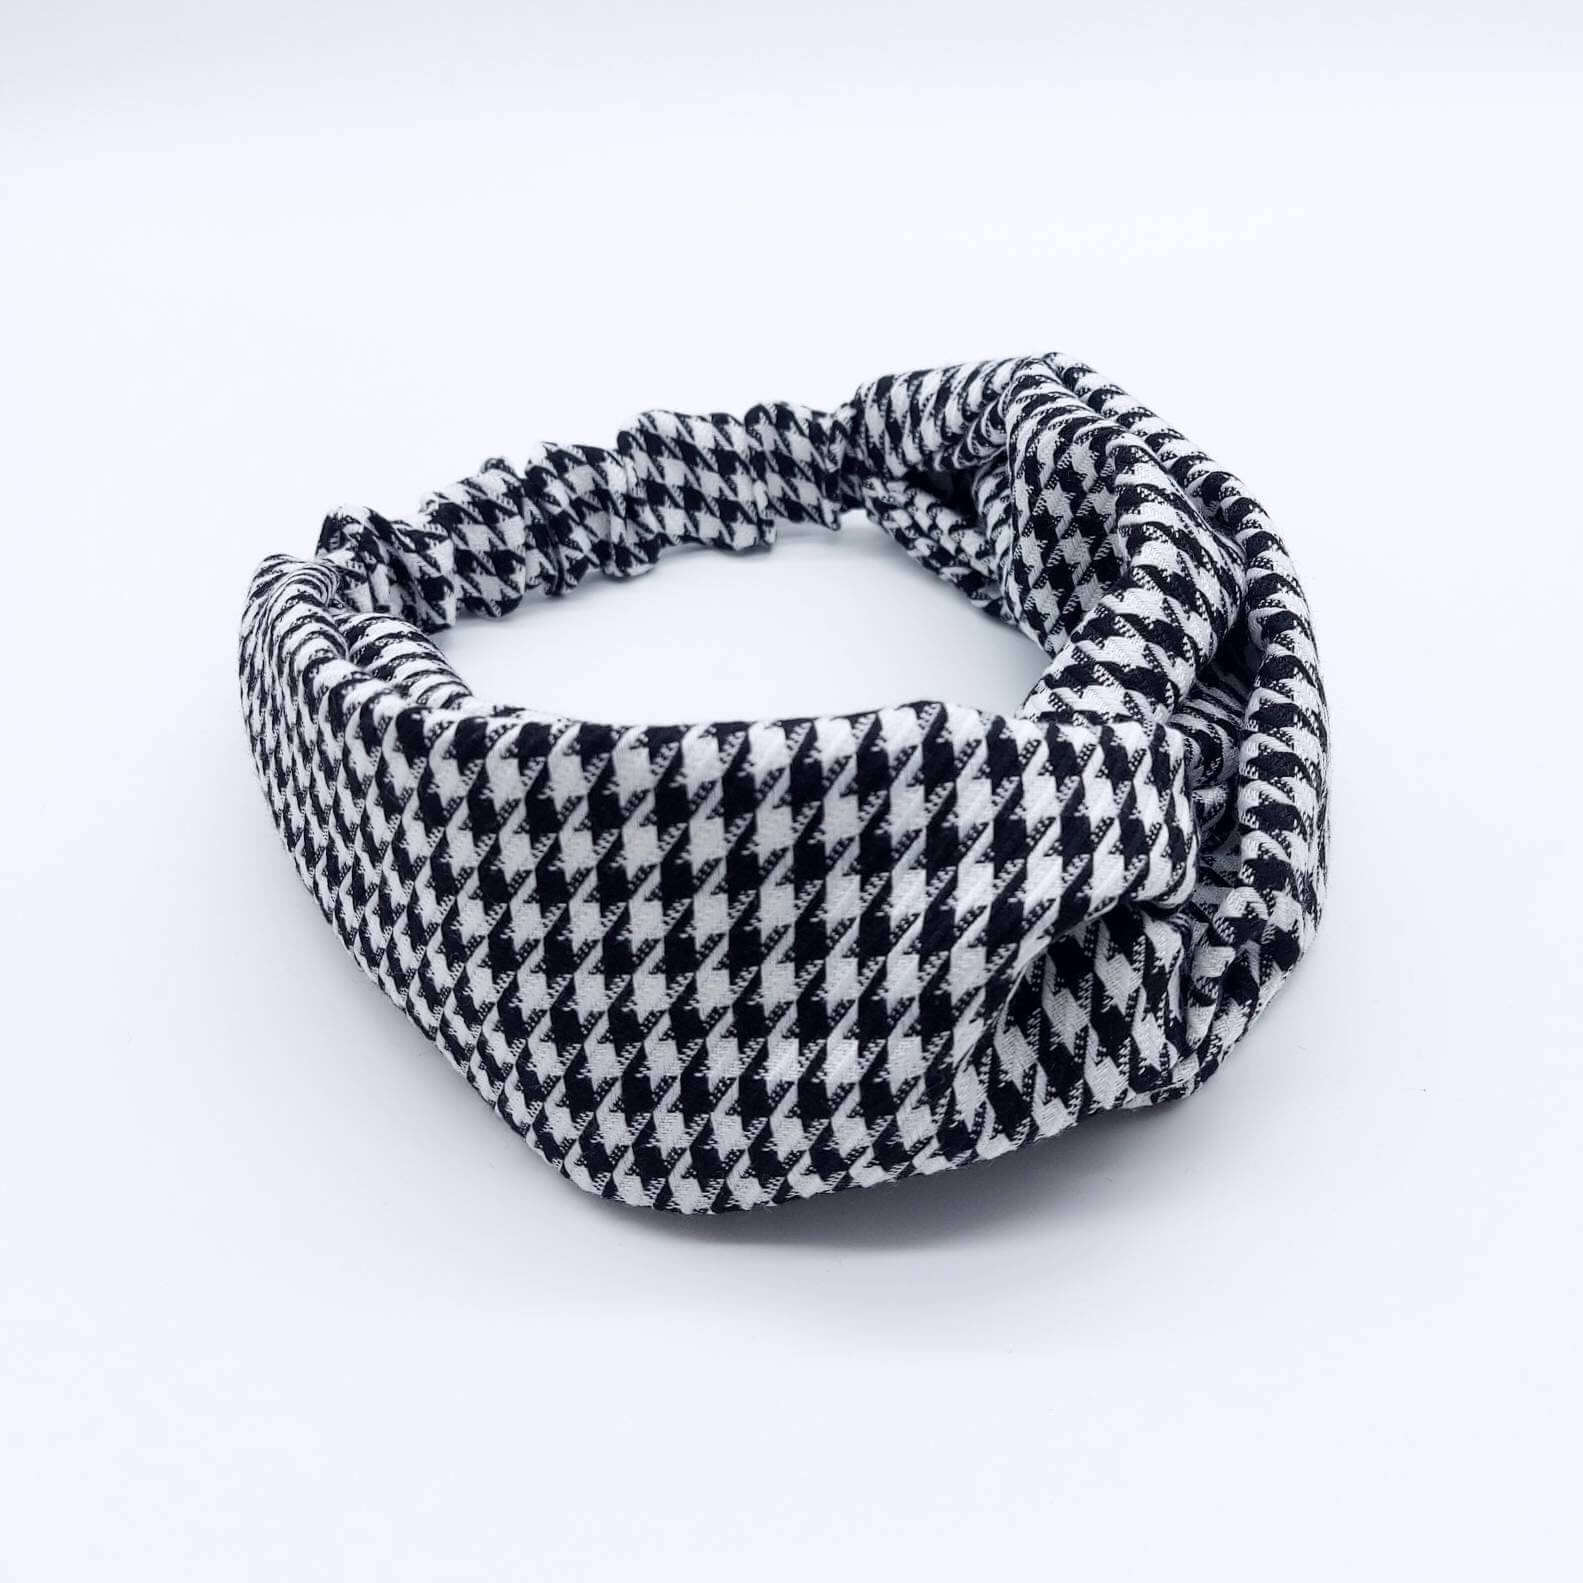 A luxurious, elasticated, turban twist headband made from a classic, houndstooth, black and white fabric.